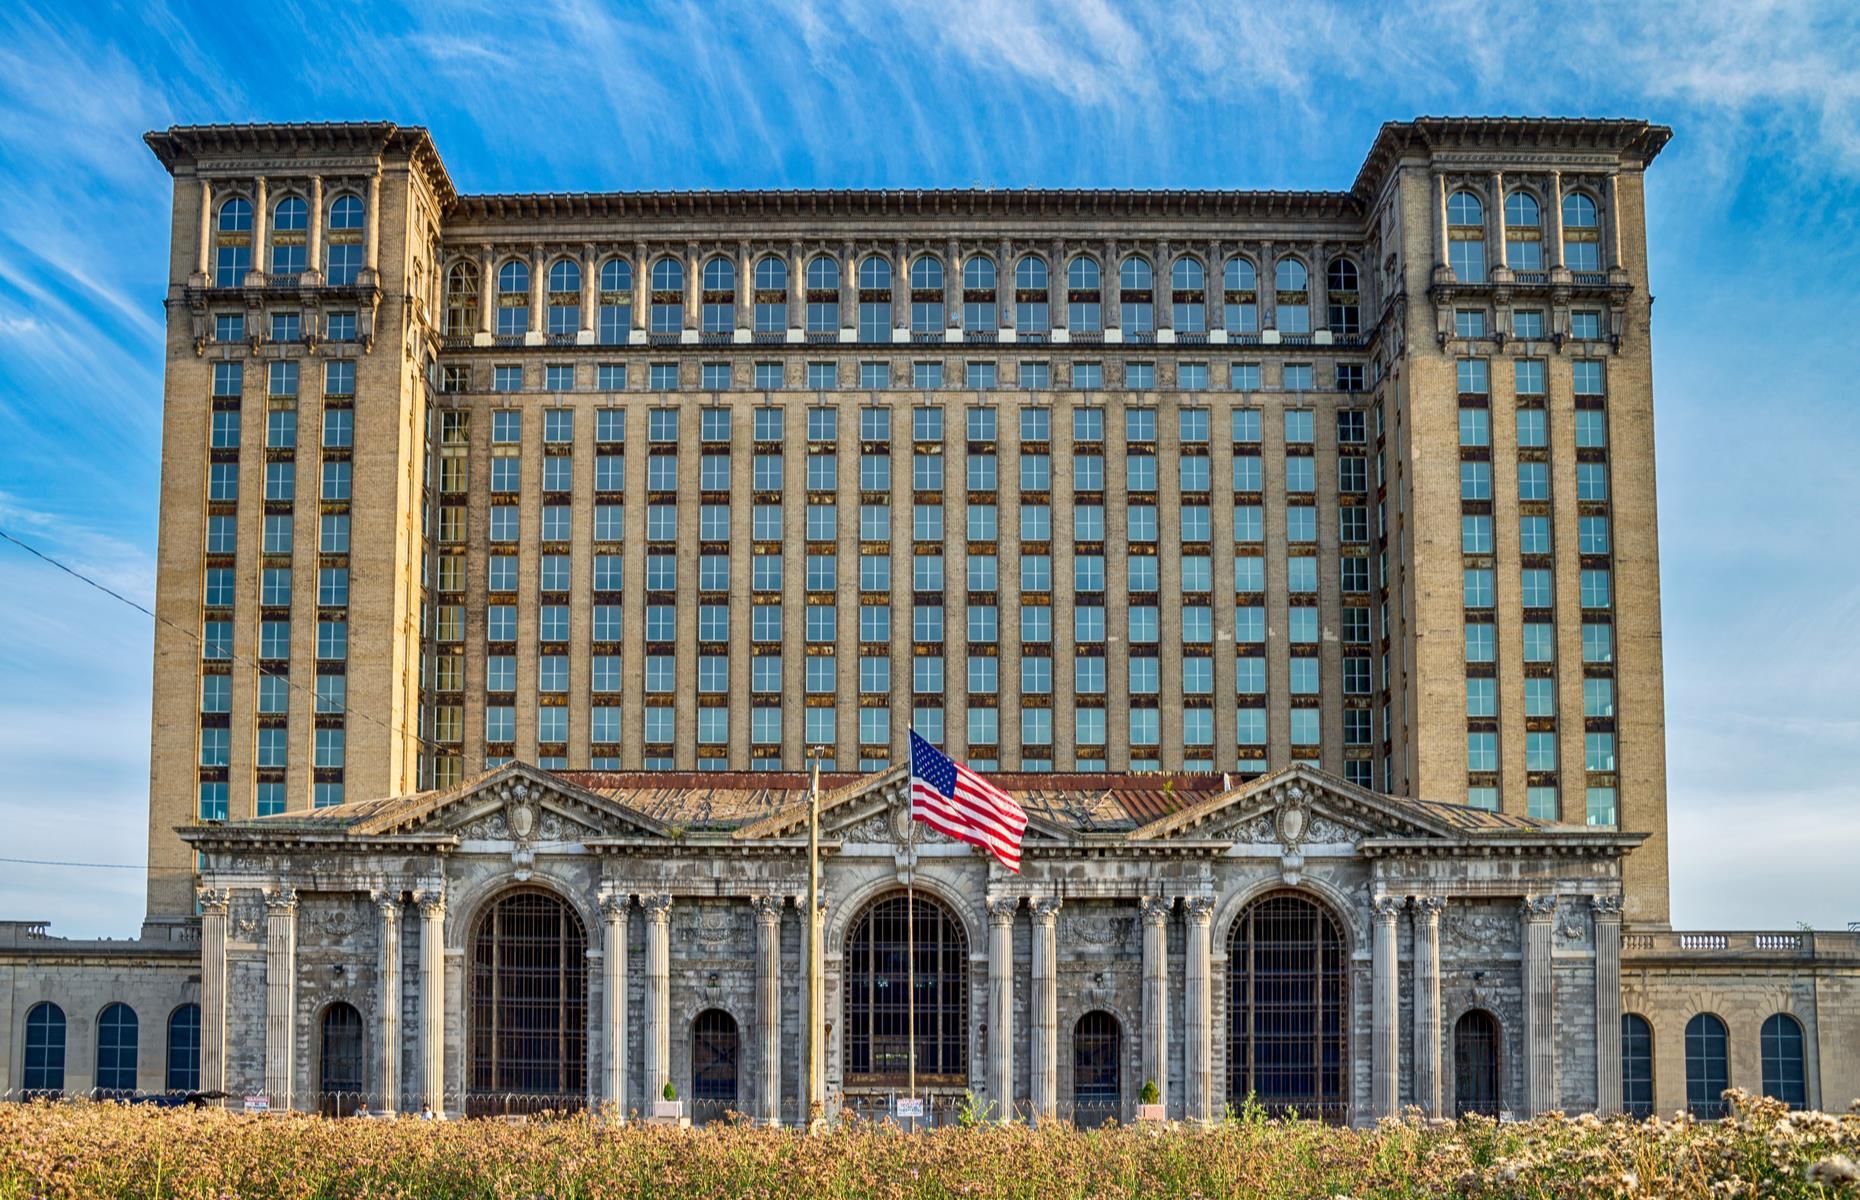 <p>For many, Michigan Central Station is an icon of Detroit – a symbol of its industrial boom and its fall from heady heights in the 20th century. And as the Motor City regenerates once more, big things are on the horizon for the Beaux-Arts-style station building, which closed in the 1980s and stood abandoned for decades. It's now been bought up by Ford, and work has begun to transform it into a sprawling campus with businesses, community spaces and trails. From the outside, though, it's still a haunting reminder of Detroit's past. </p>